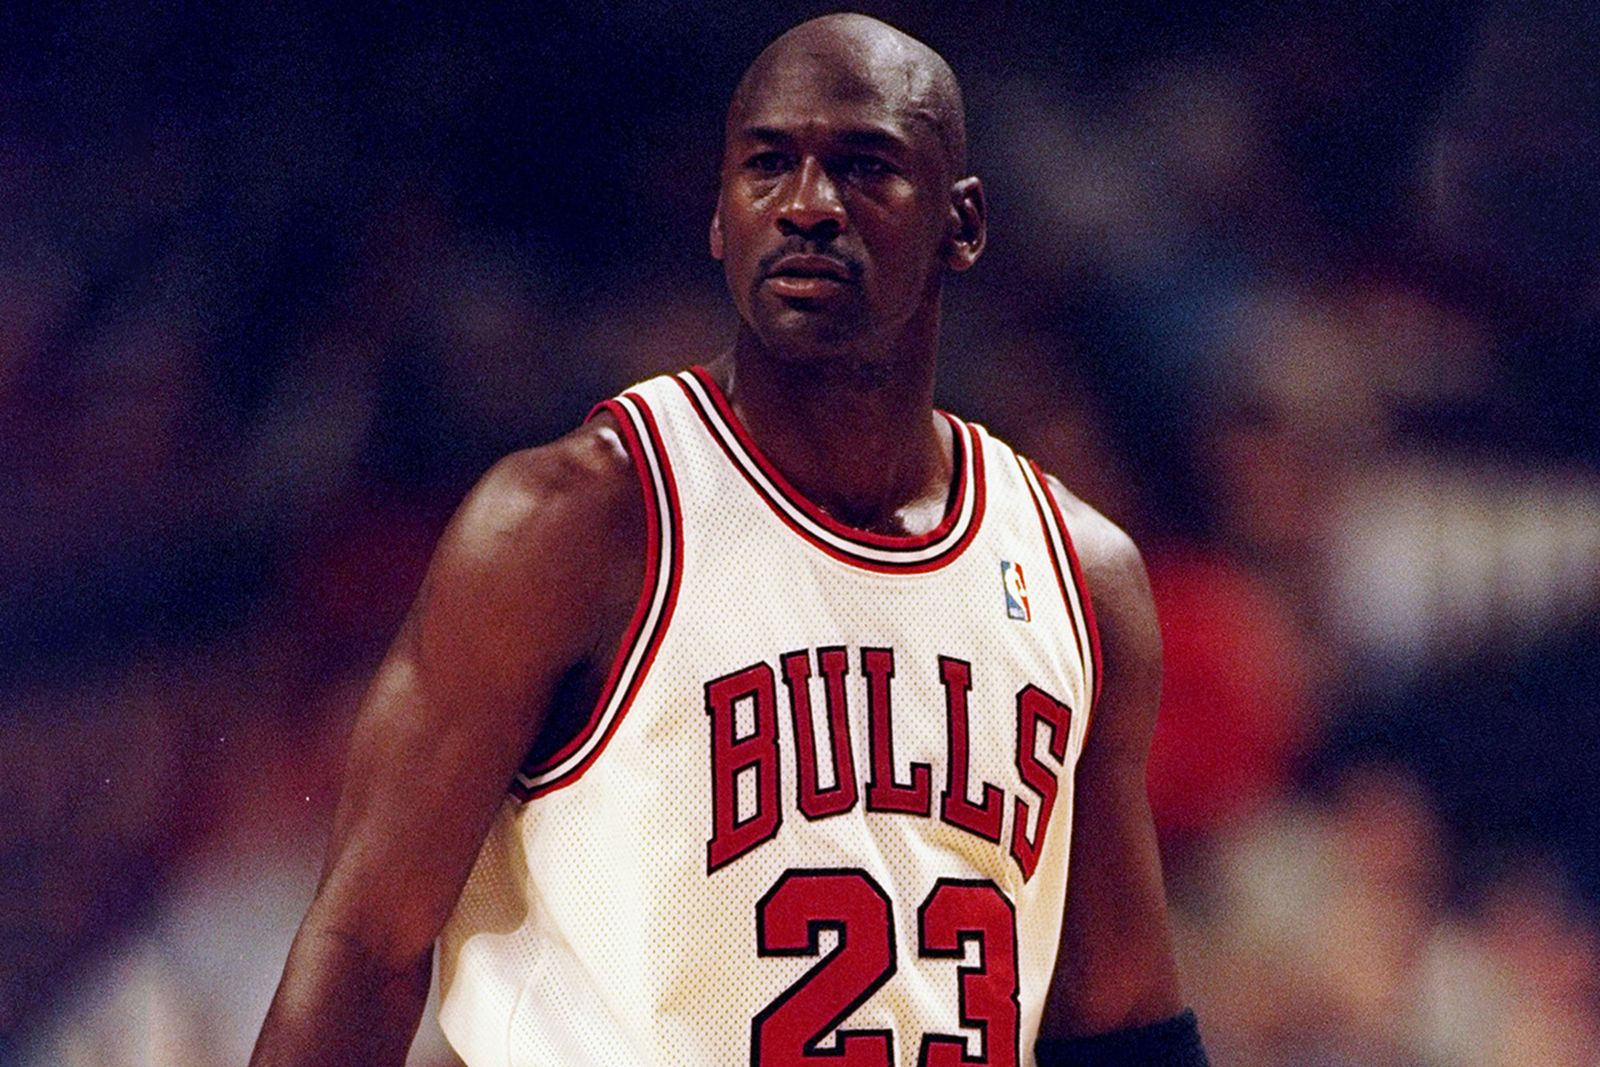 Michael Jordan of the Chicago Bulls looks on during a game against the San Antonio Spurs